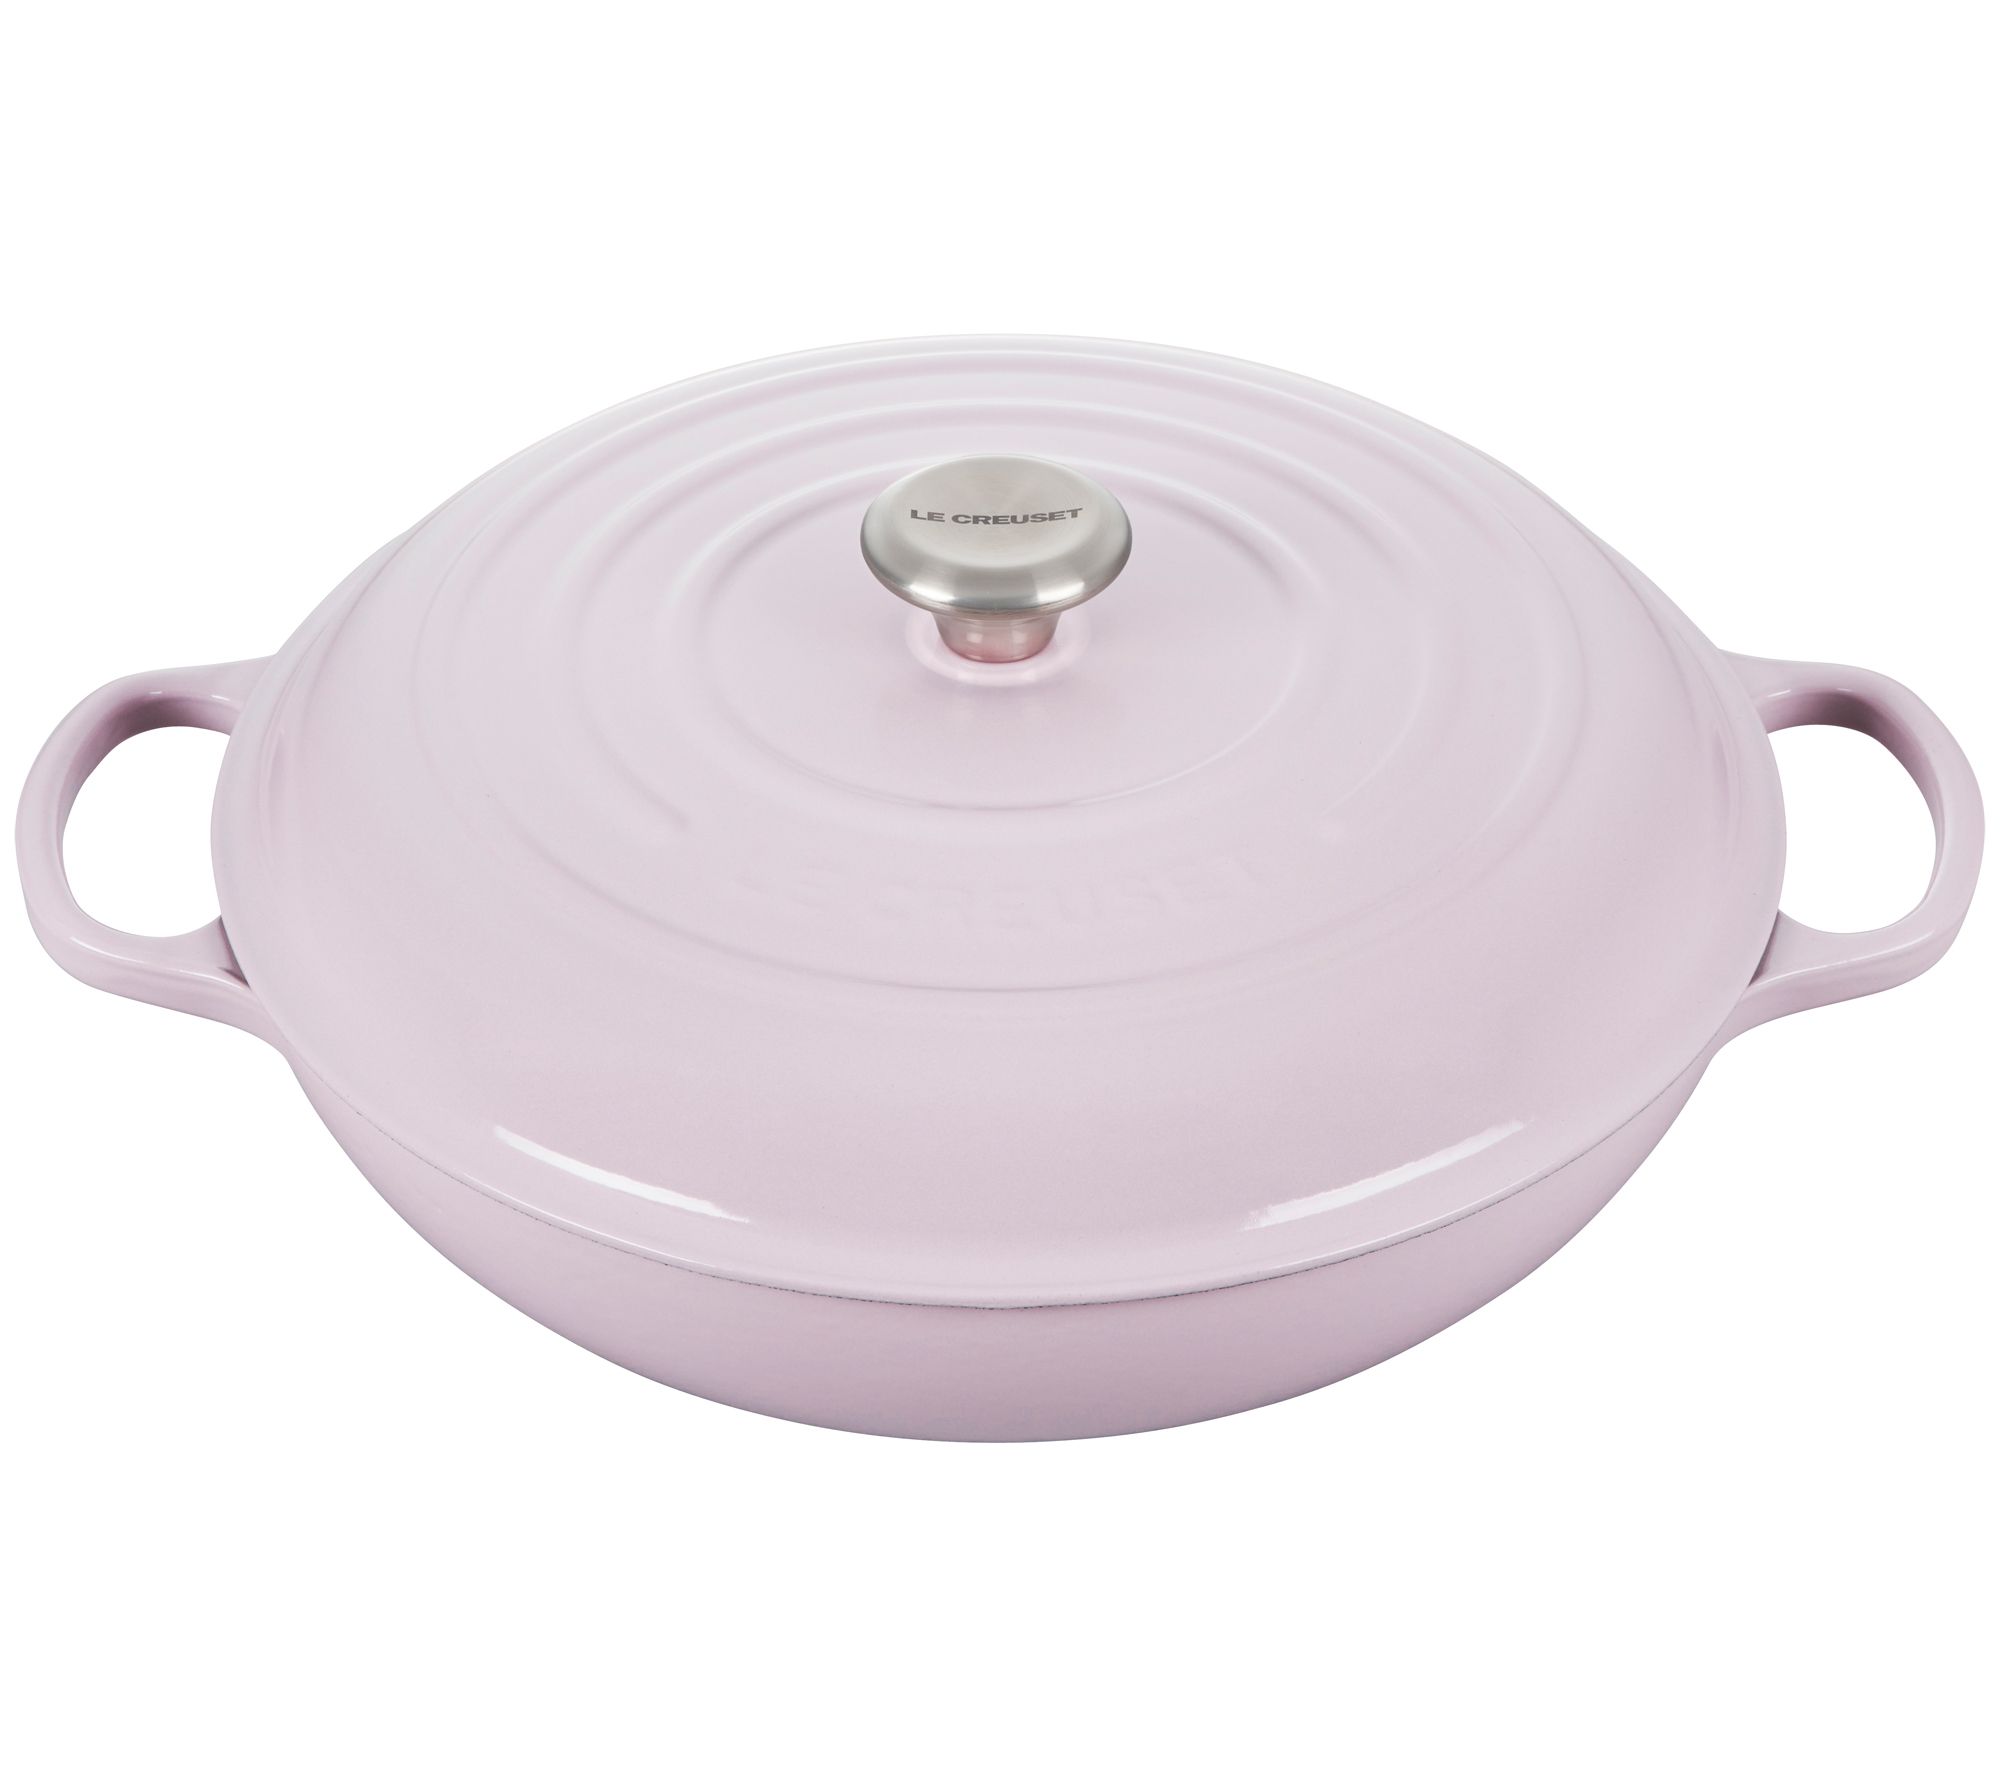 Le Creuset 4.5 qt Oval Dutch Oven w/Grill Pan Lid & Accessories on QVC 